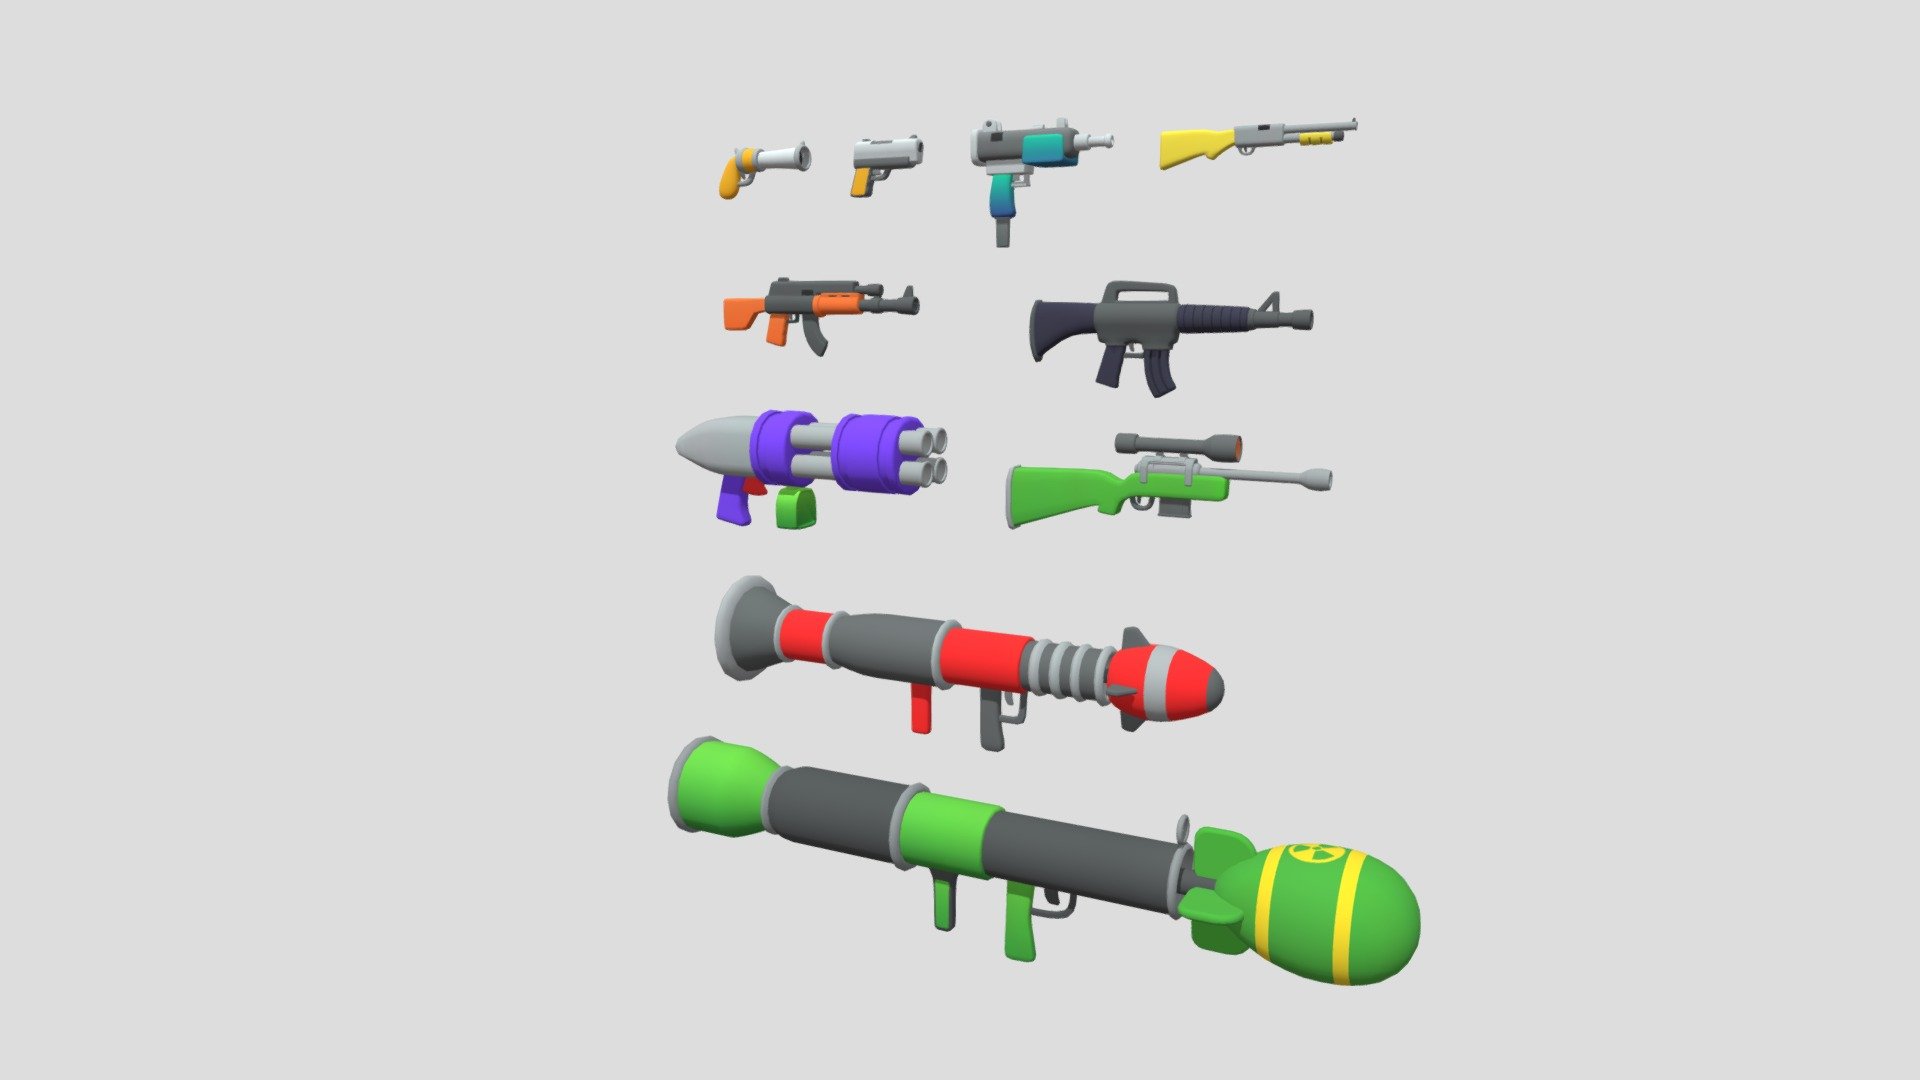 Low poly gun models for hypercasual games 3d model